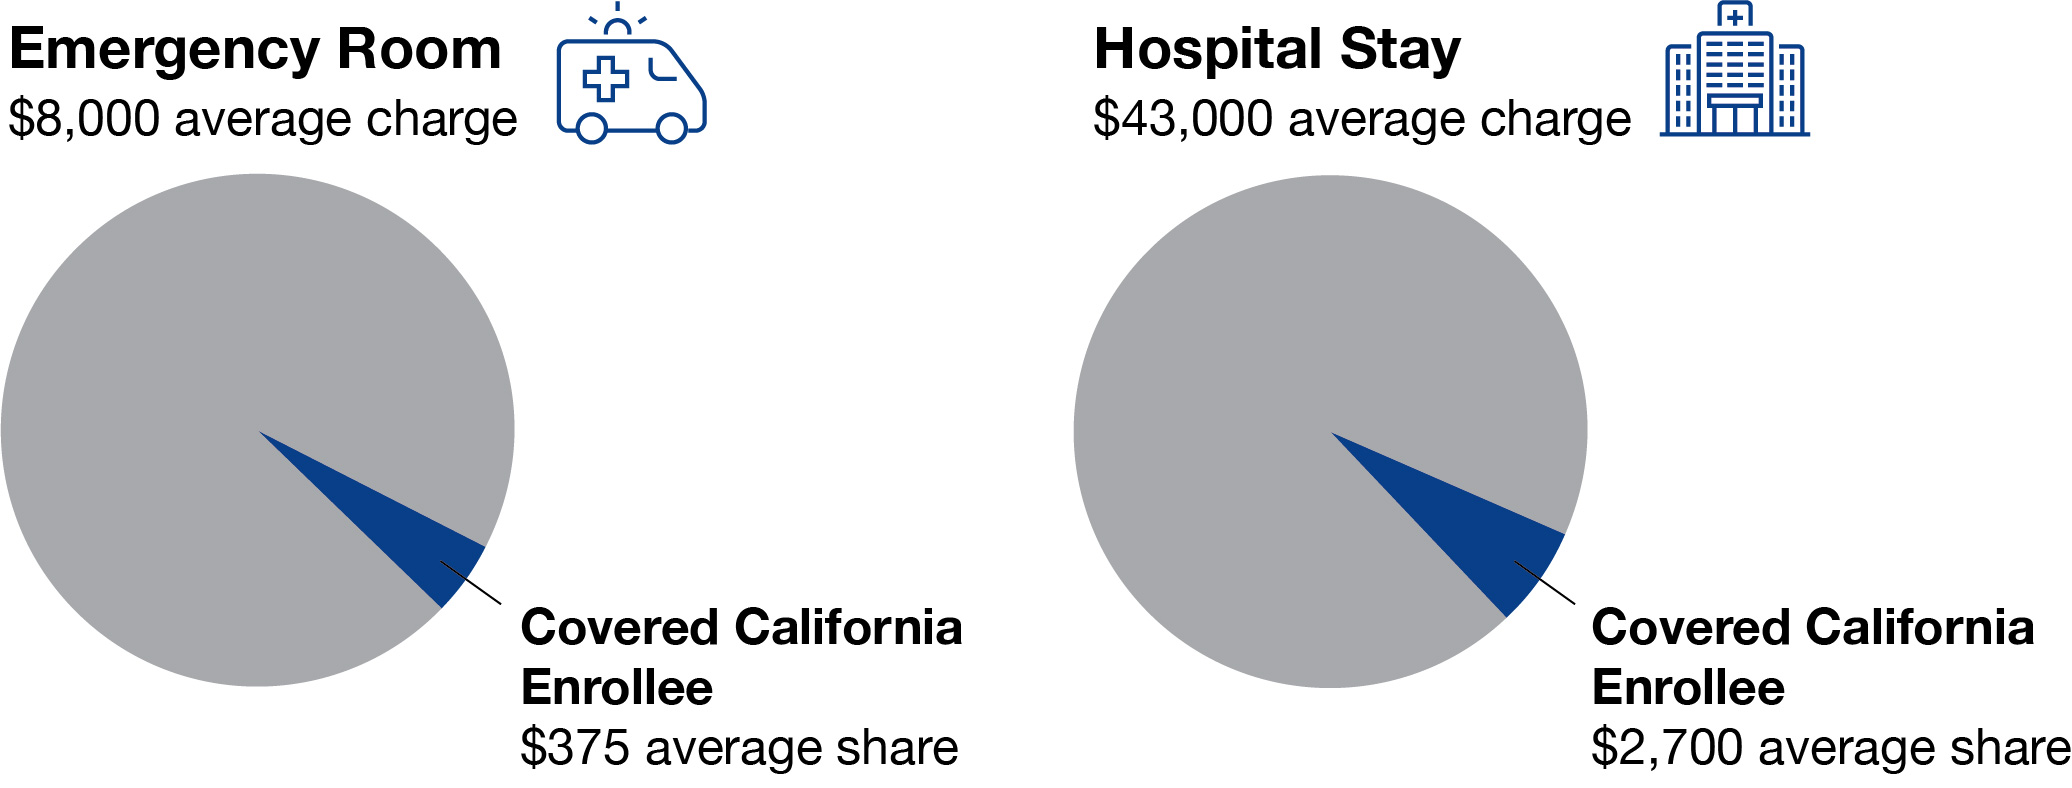 pie charts showing Covered California enrollee share of costs